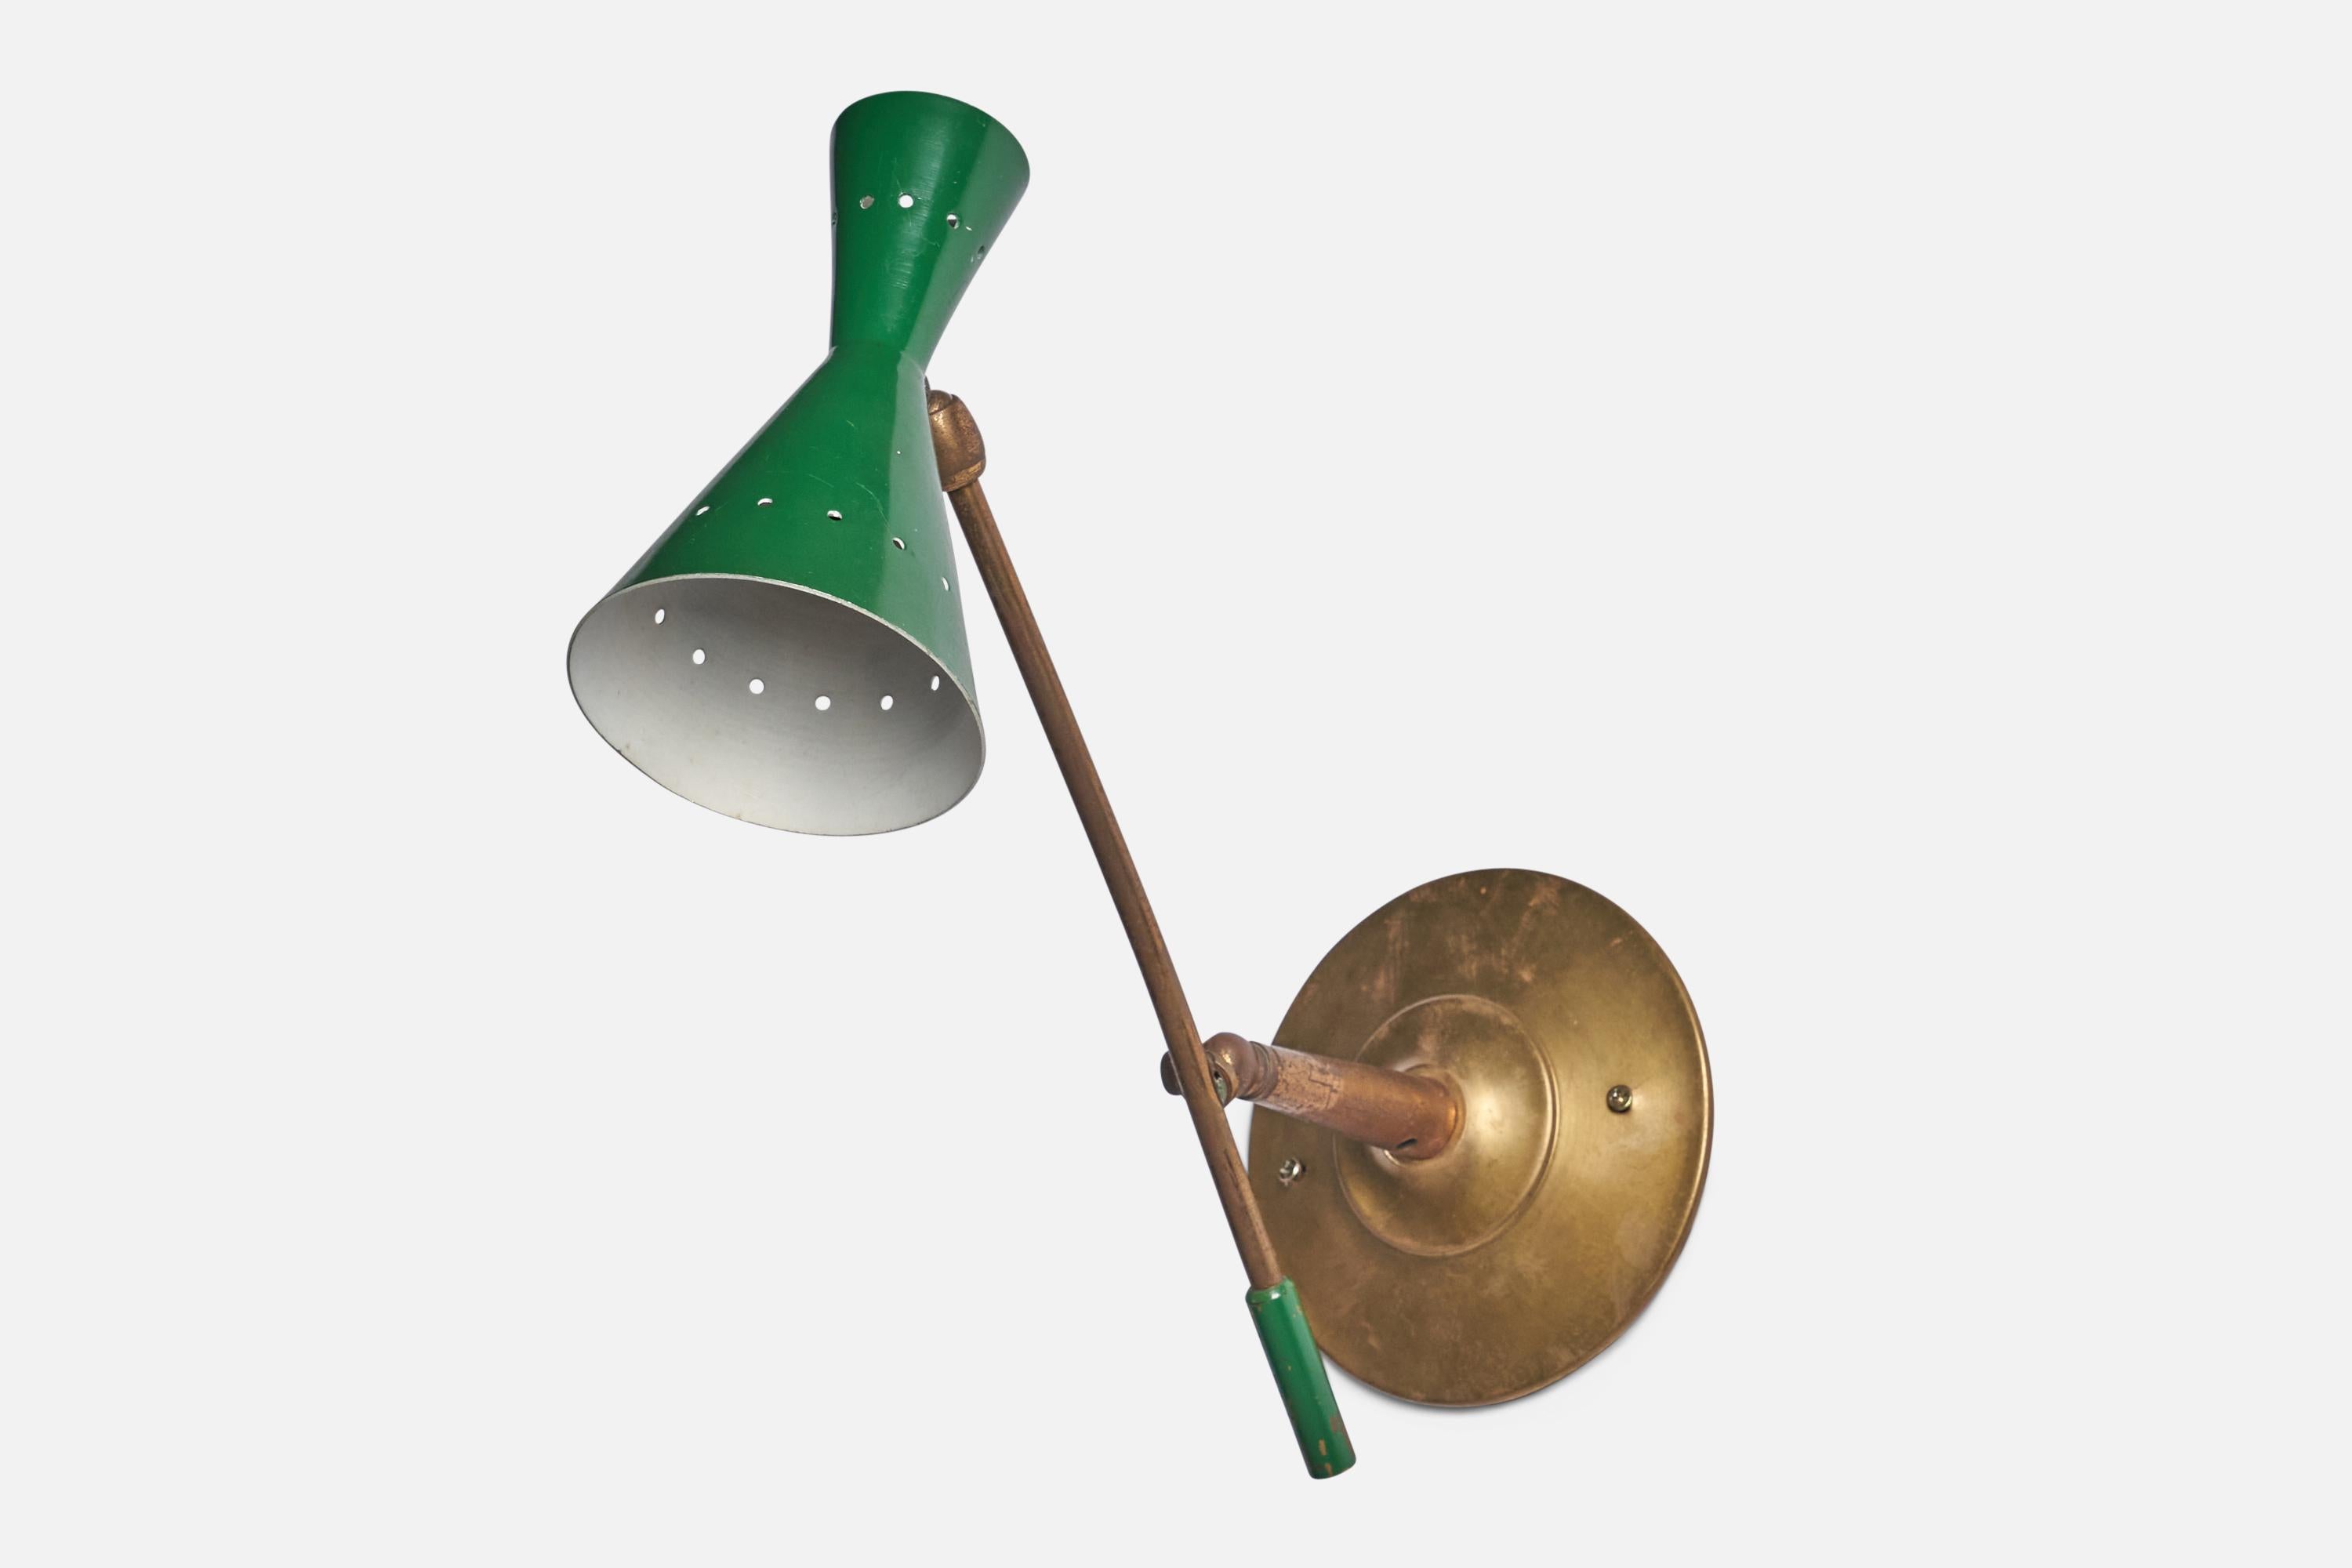 An adjustable brass and green-lacquered metal table lamp designed and produced in Italy, 1940s.

Overall Dimensions (inches): 11.25” H x 5” W x 13.25” D
Back Plate Dimensions (inches): 5” Diameter
Bulb Specifications: E-14 Bulb
Number of Sockets: 1